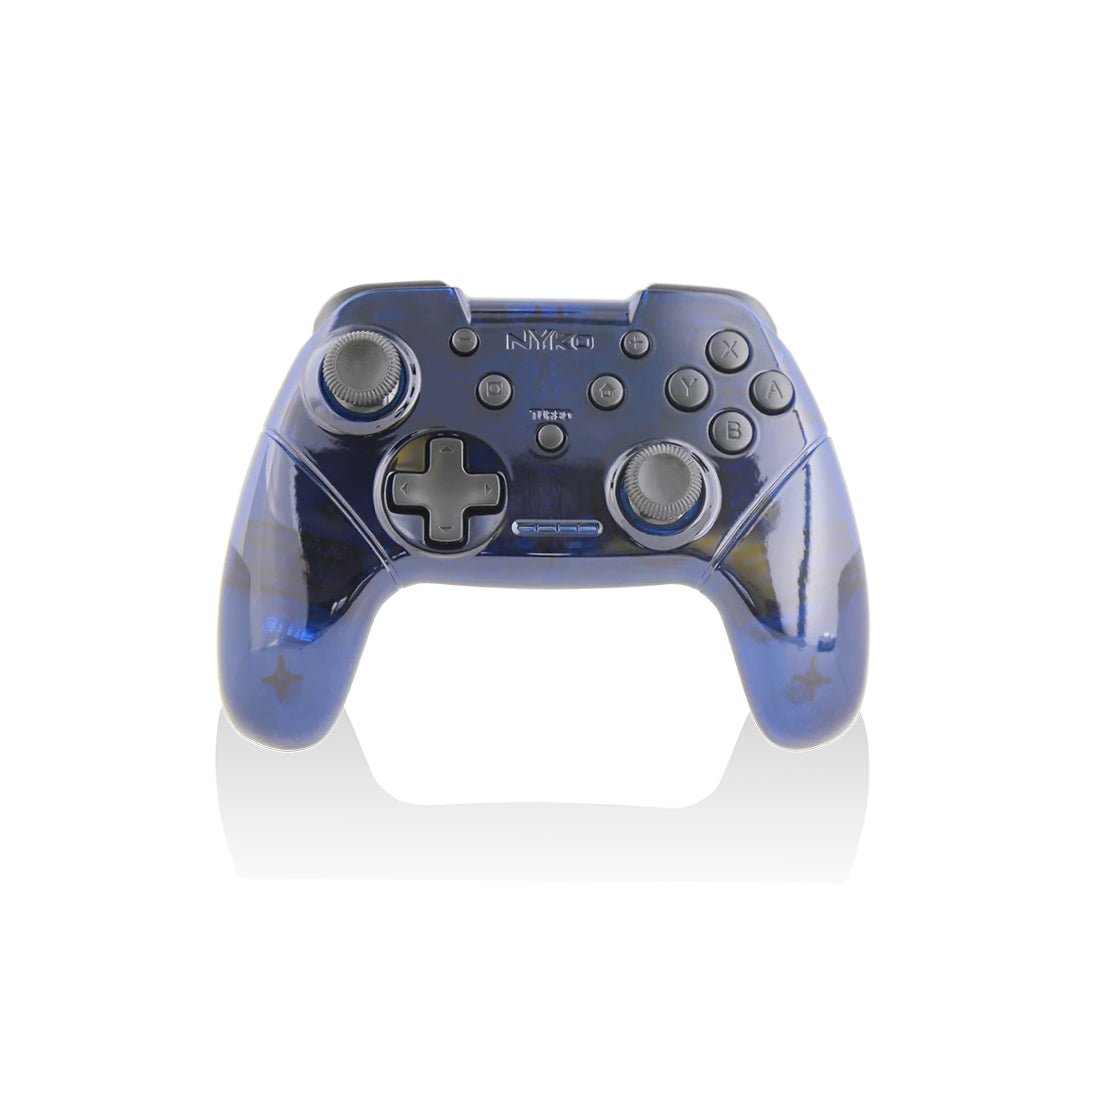 Nyko Wireless Core Controller for Nintendo Switch - Blue/White - Store 974 | ستور ٩٧٤